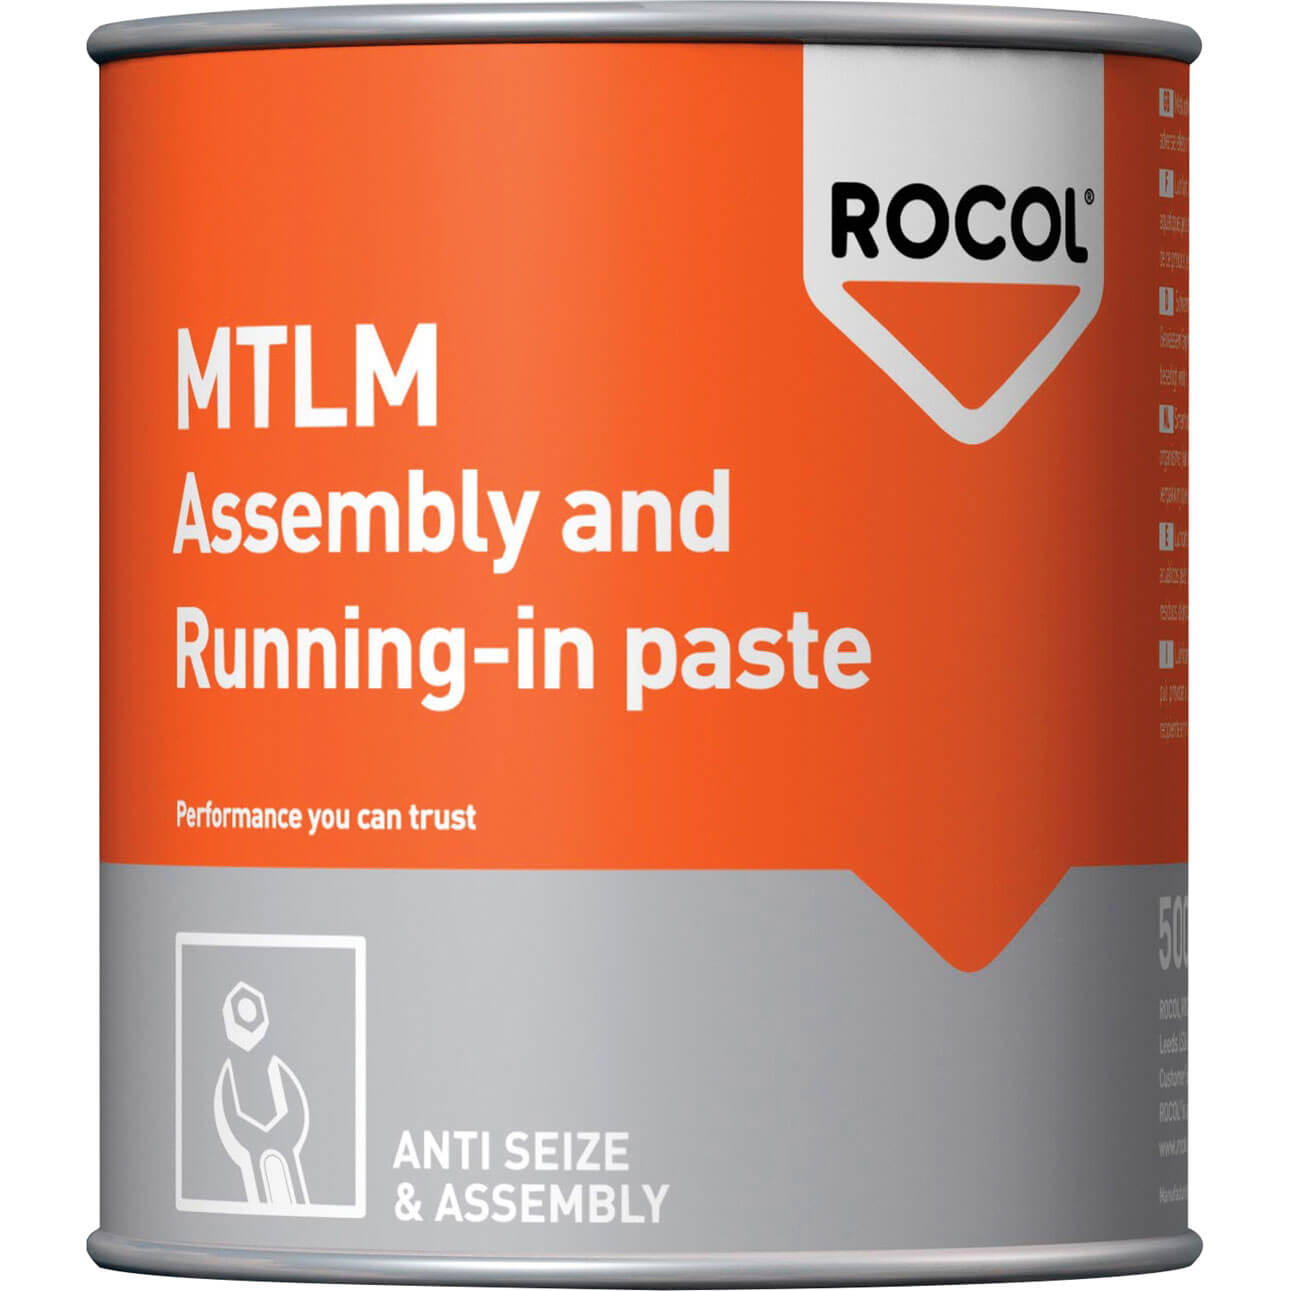 Rocol Mtlm Assembly And Run In Paste